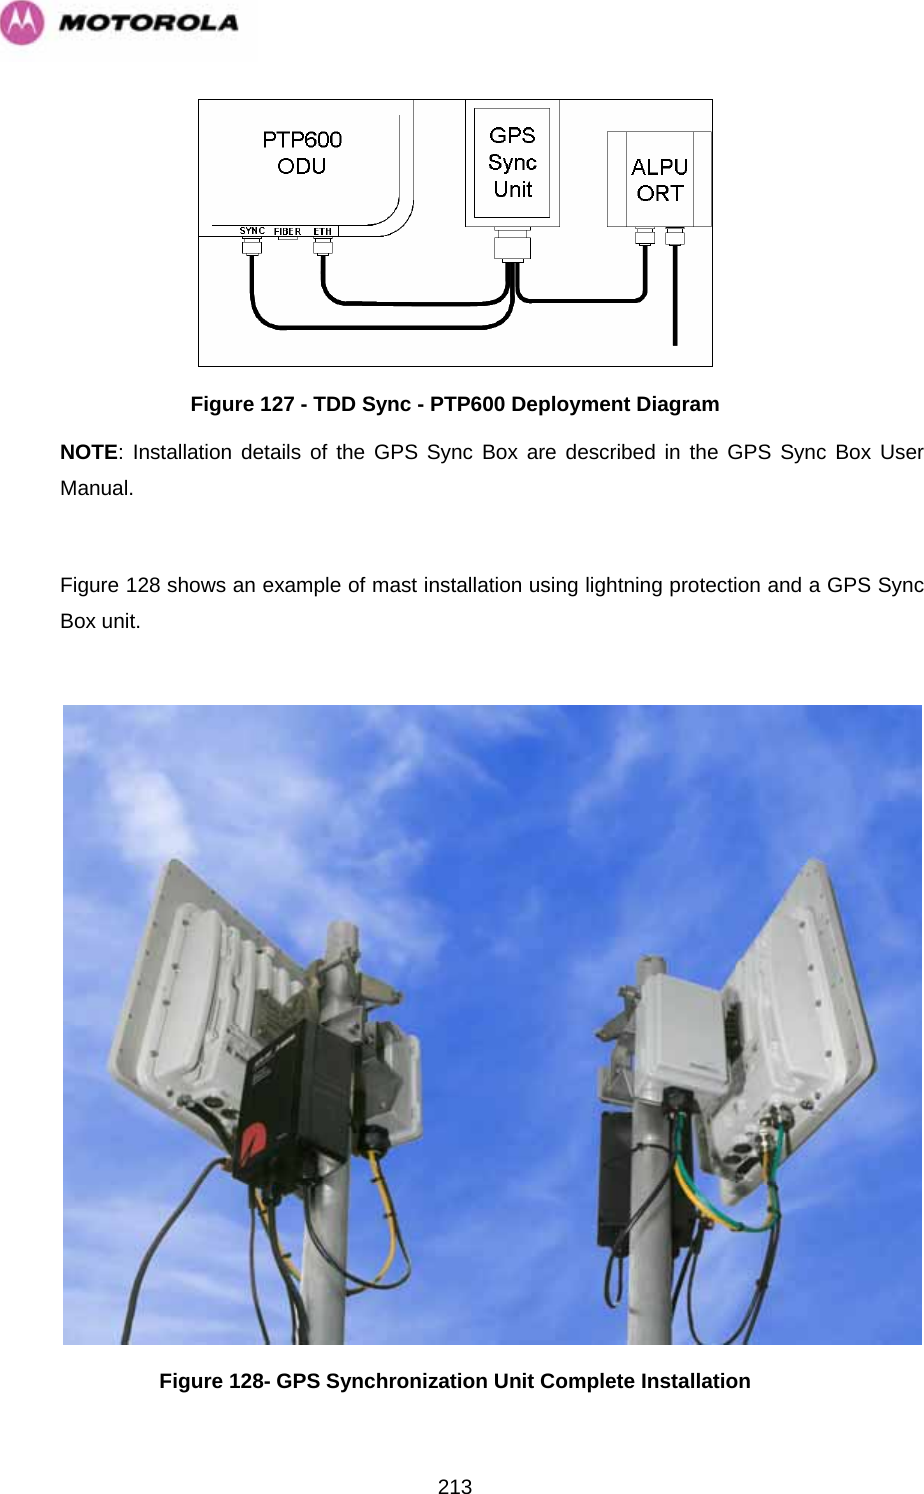   213 Figure 127 - TDD Sync - PTP600 Deployment Diagram NOTE: Installation details of the GPS Sync Box are described in the GPS Sync Box User Manual.   Figure 128 shows an example of mast installation using lightning protection and a GPS Sync Box unit.   Figure 128- GPS Synchronization Unit Complete Installation 